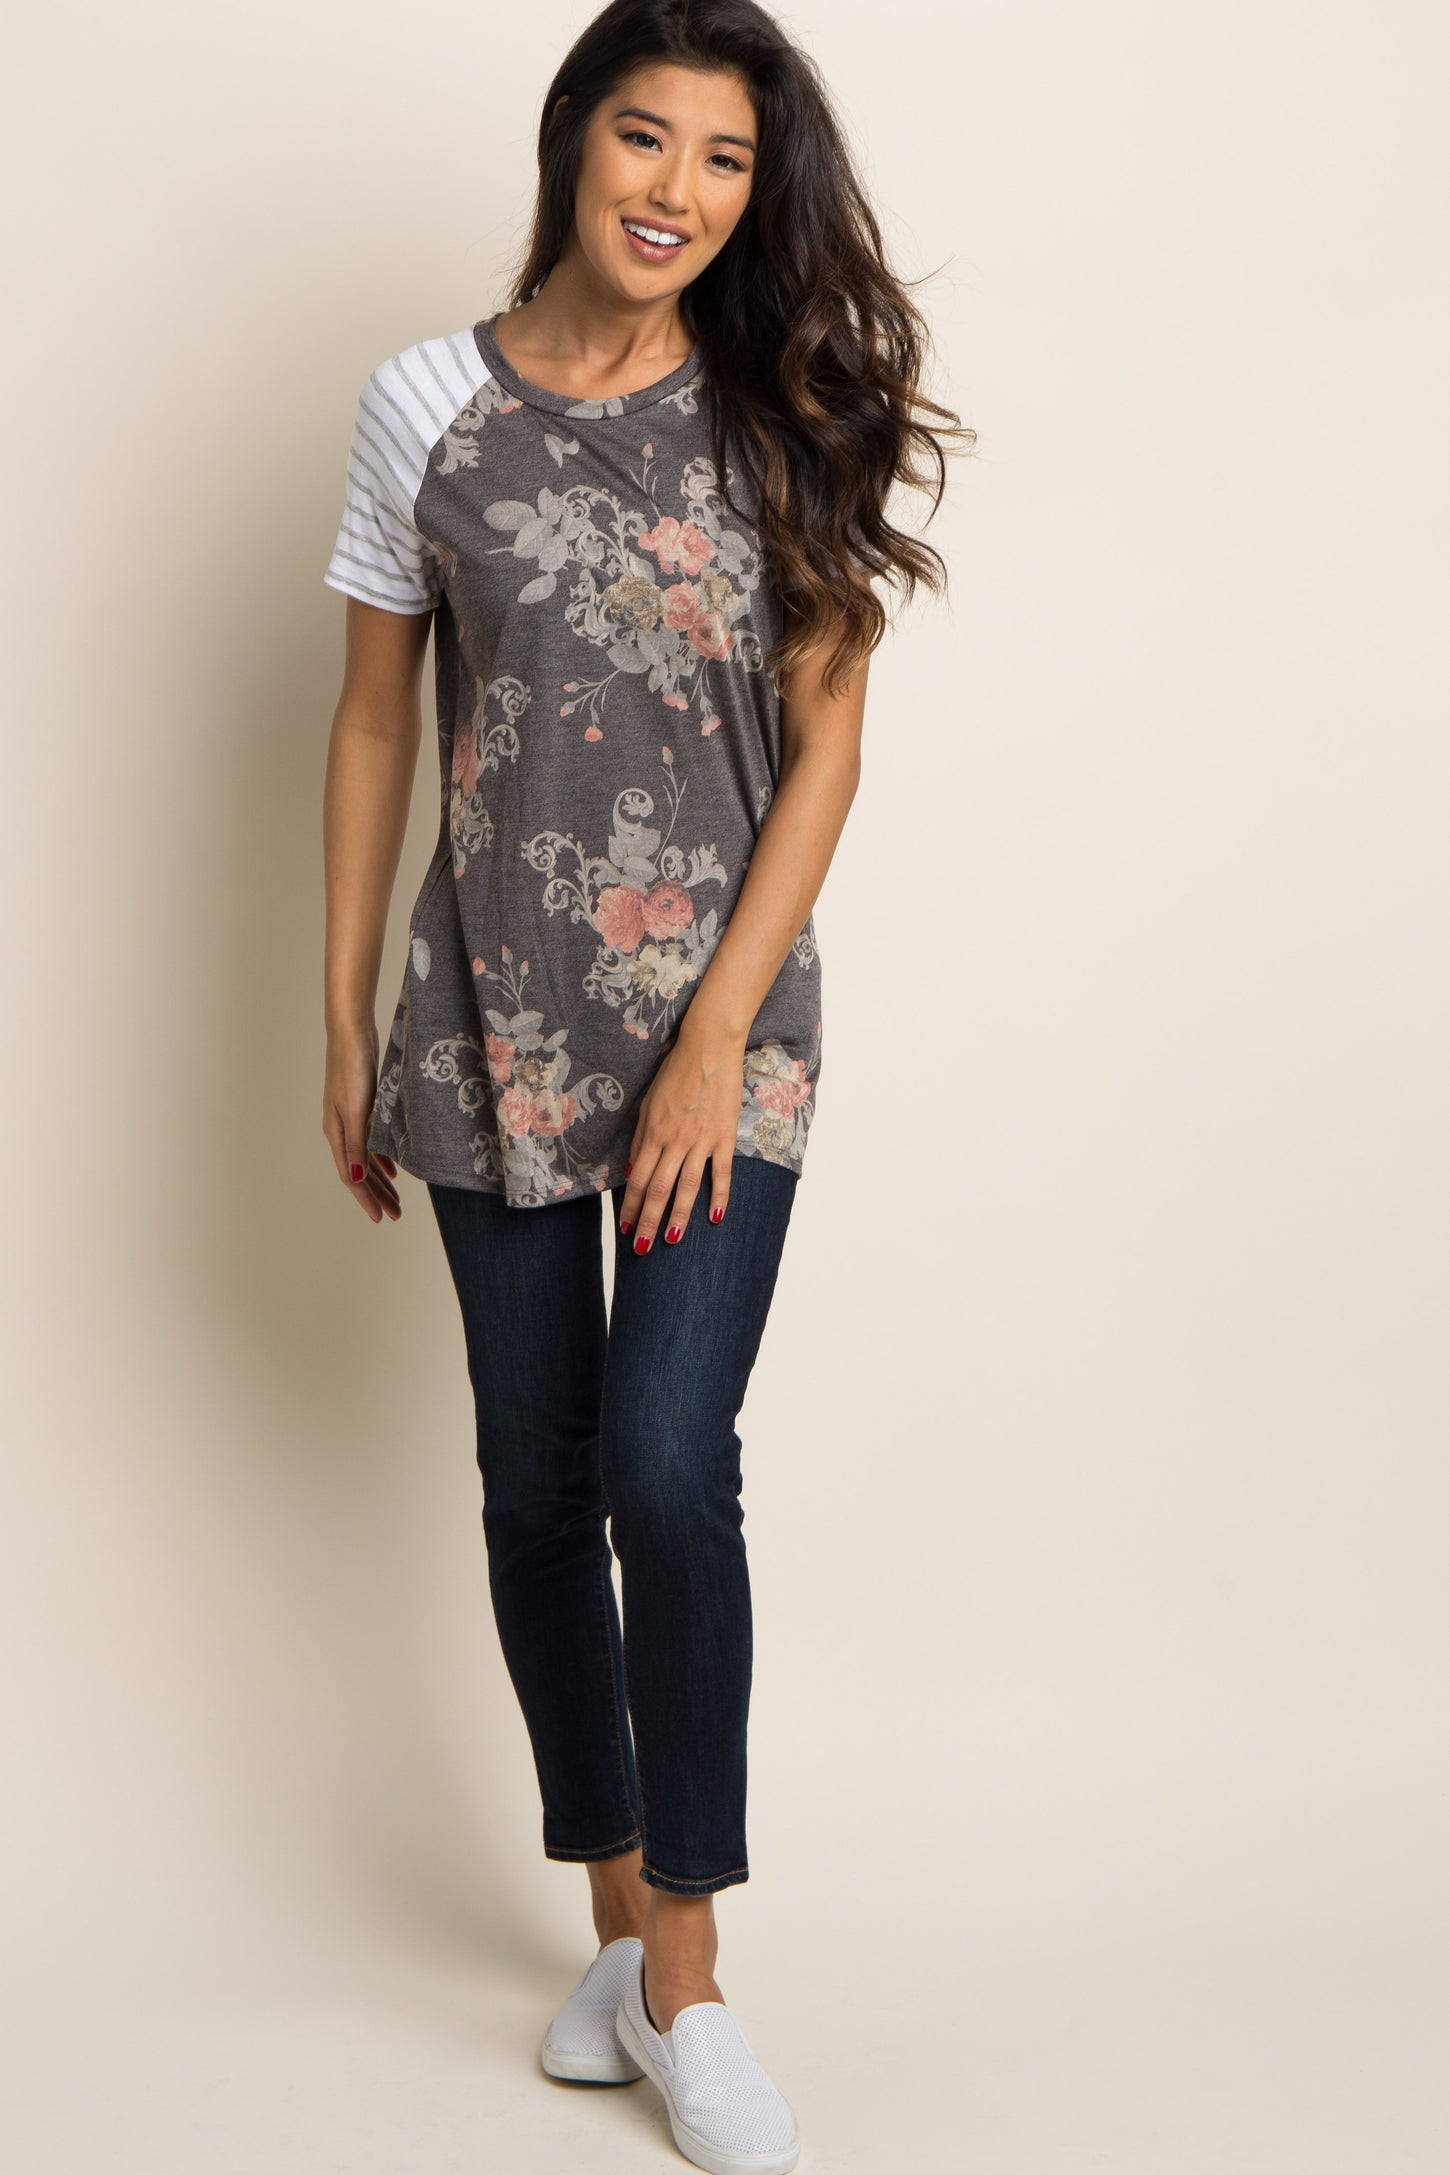 Charcoal Grey Floral Colorblock Striped Sleeve Top